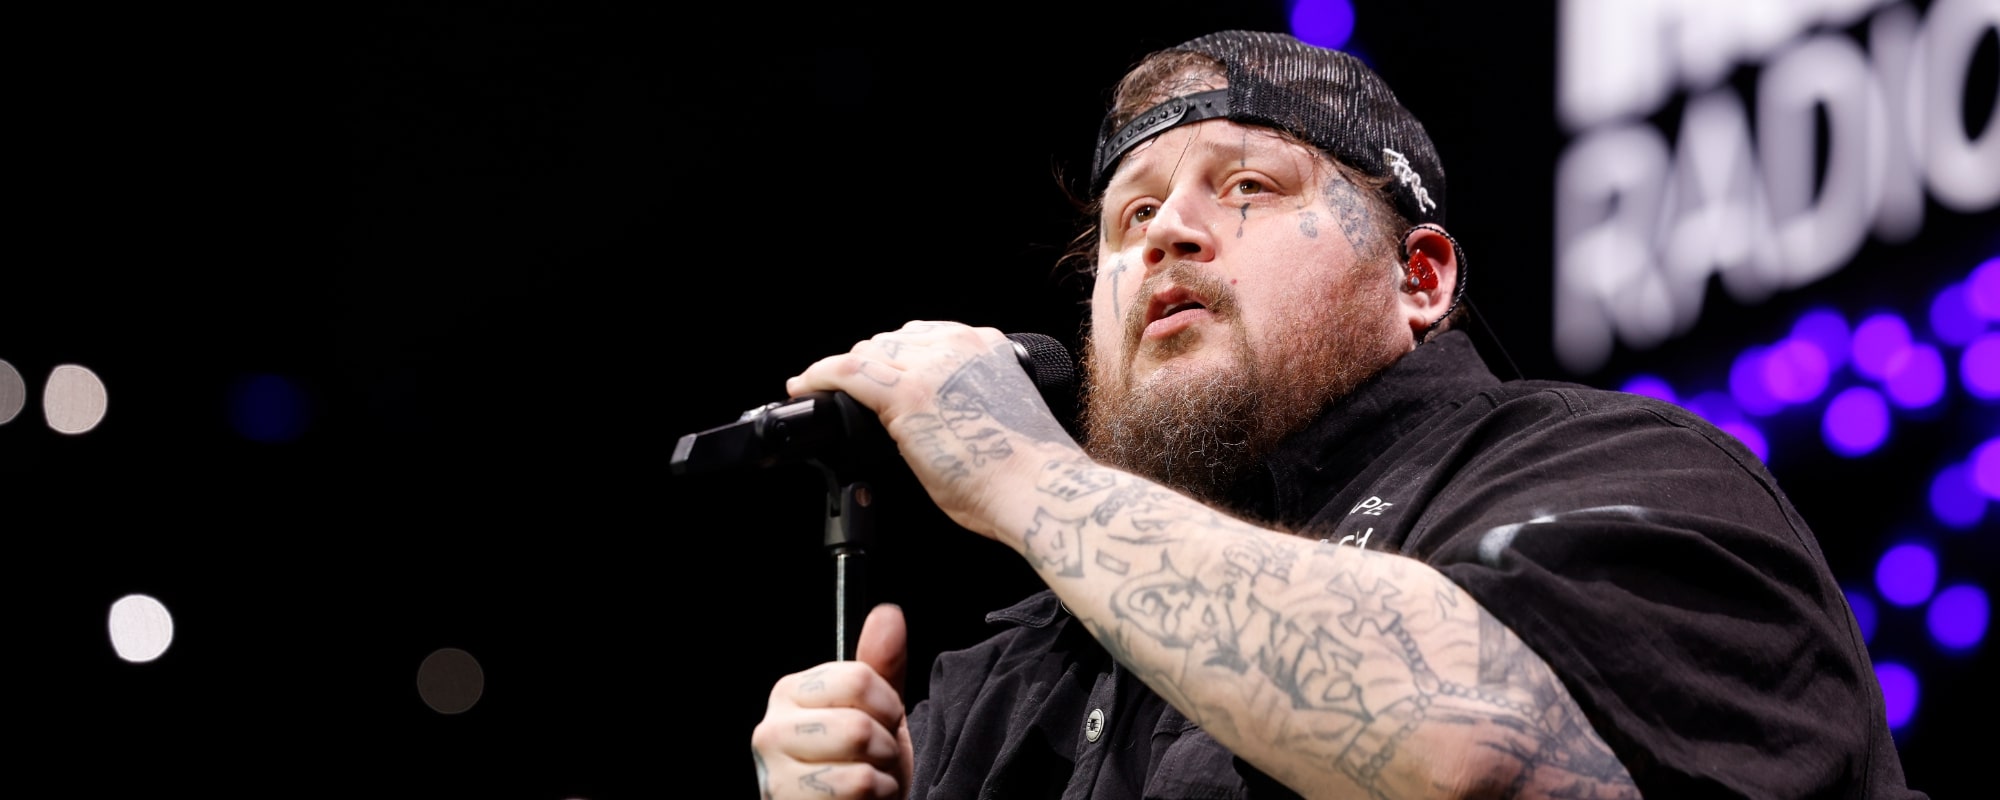 Jelly Roll Doesn’t Think He Should Win New Artist or Country Duo Grammys, Shares His Predictions